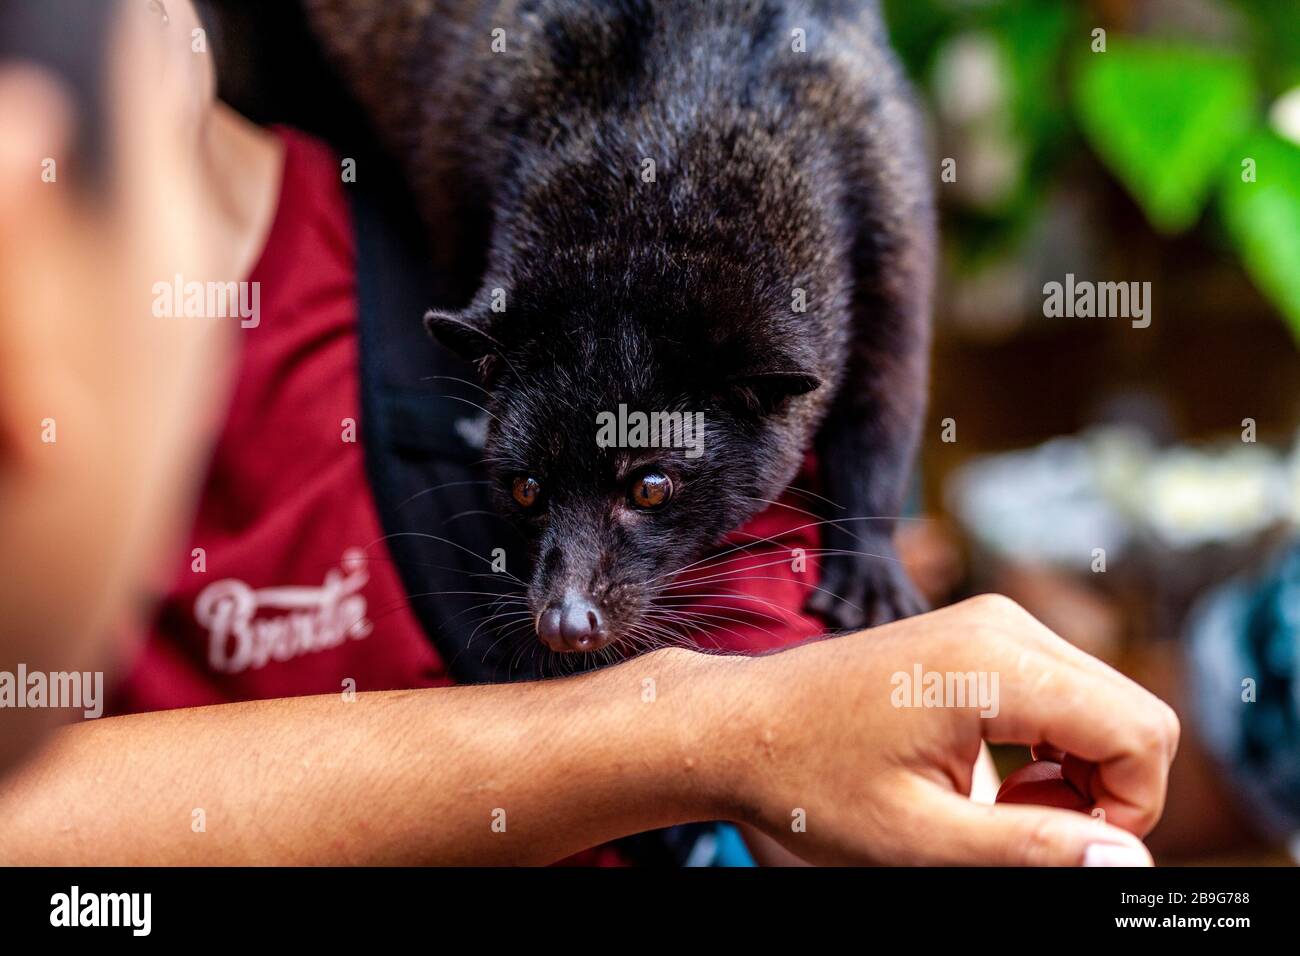 A Local Man Handling An Asian Palm Civet Used In The Production Of Luwak Coffee, Ubud, Bali, Indonesia. Stock Photo